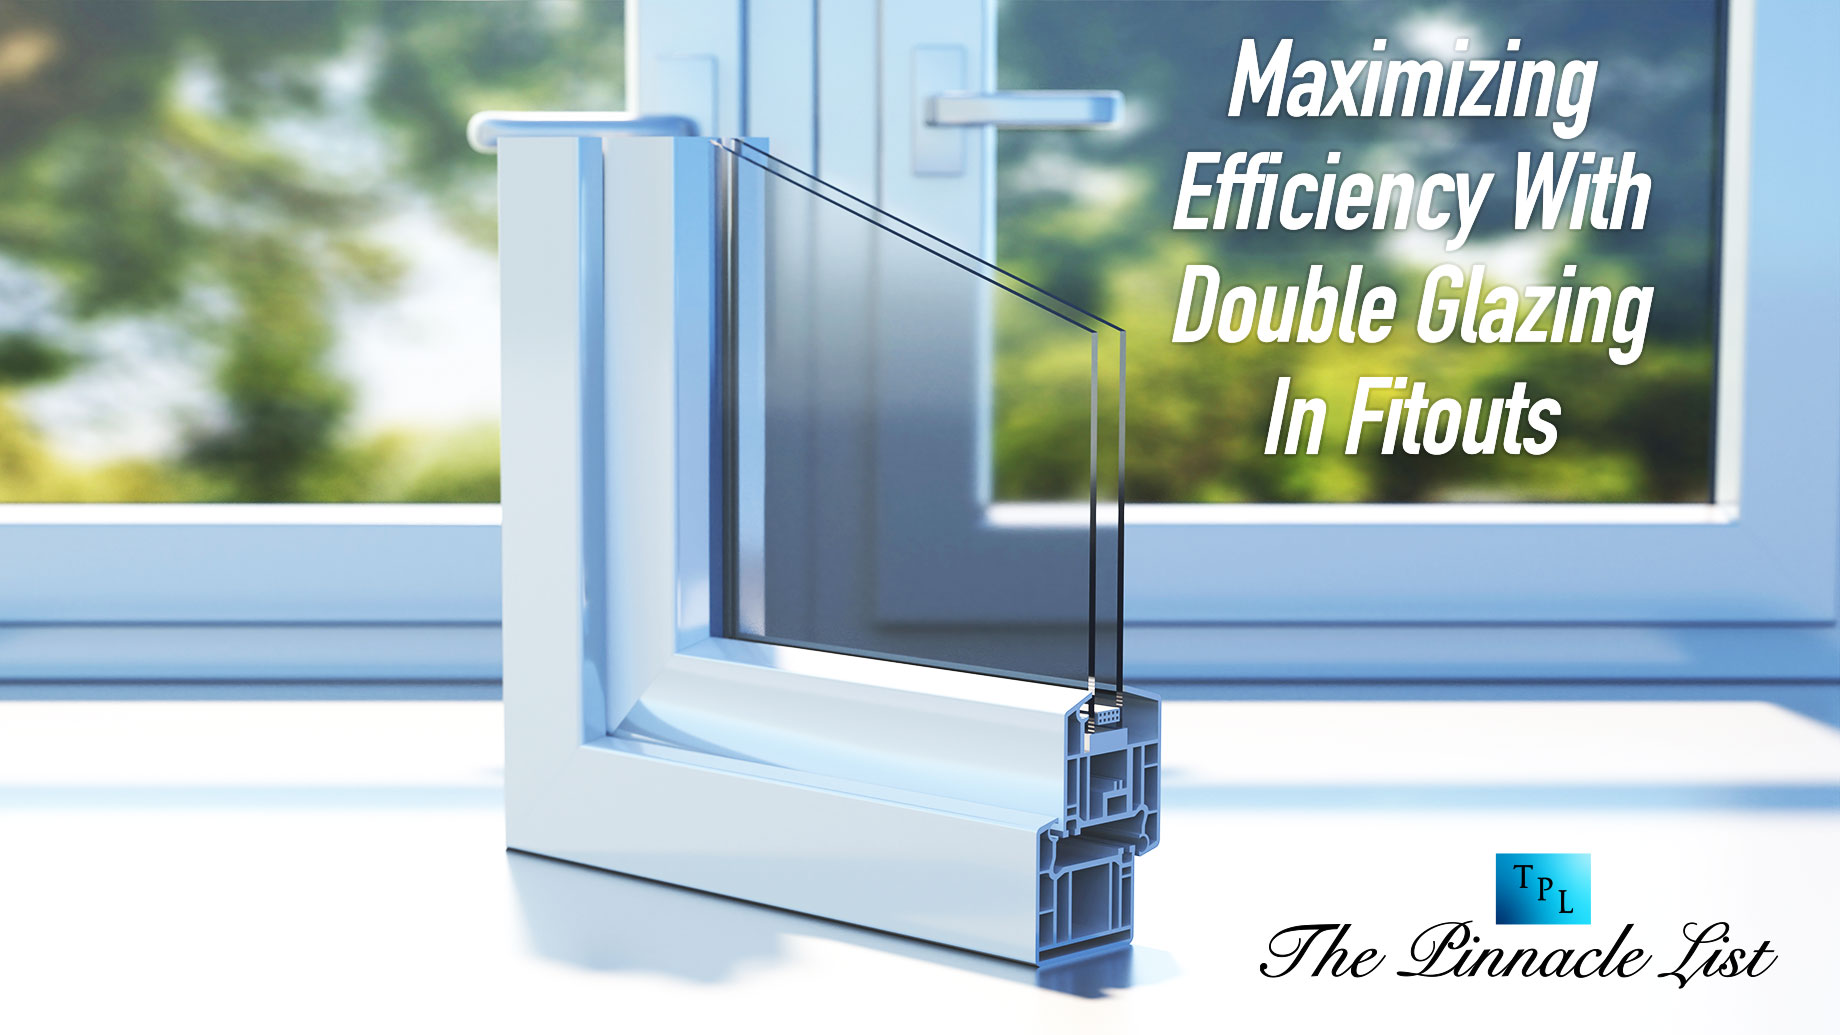 Maximizing Efficiency With Double Glazing In Fitouts